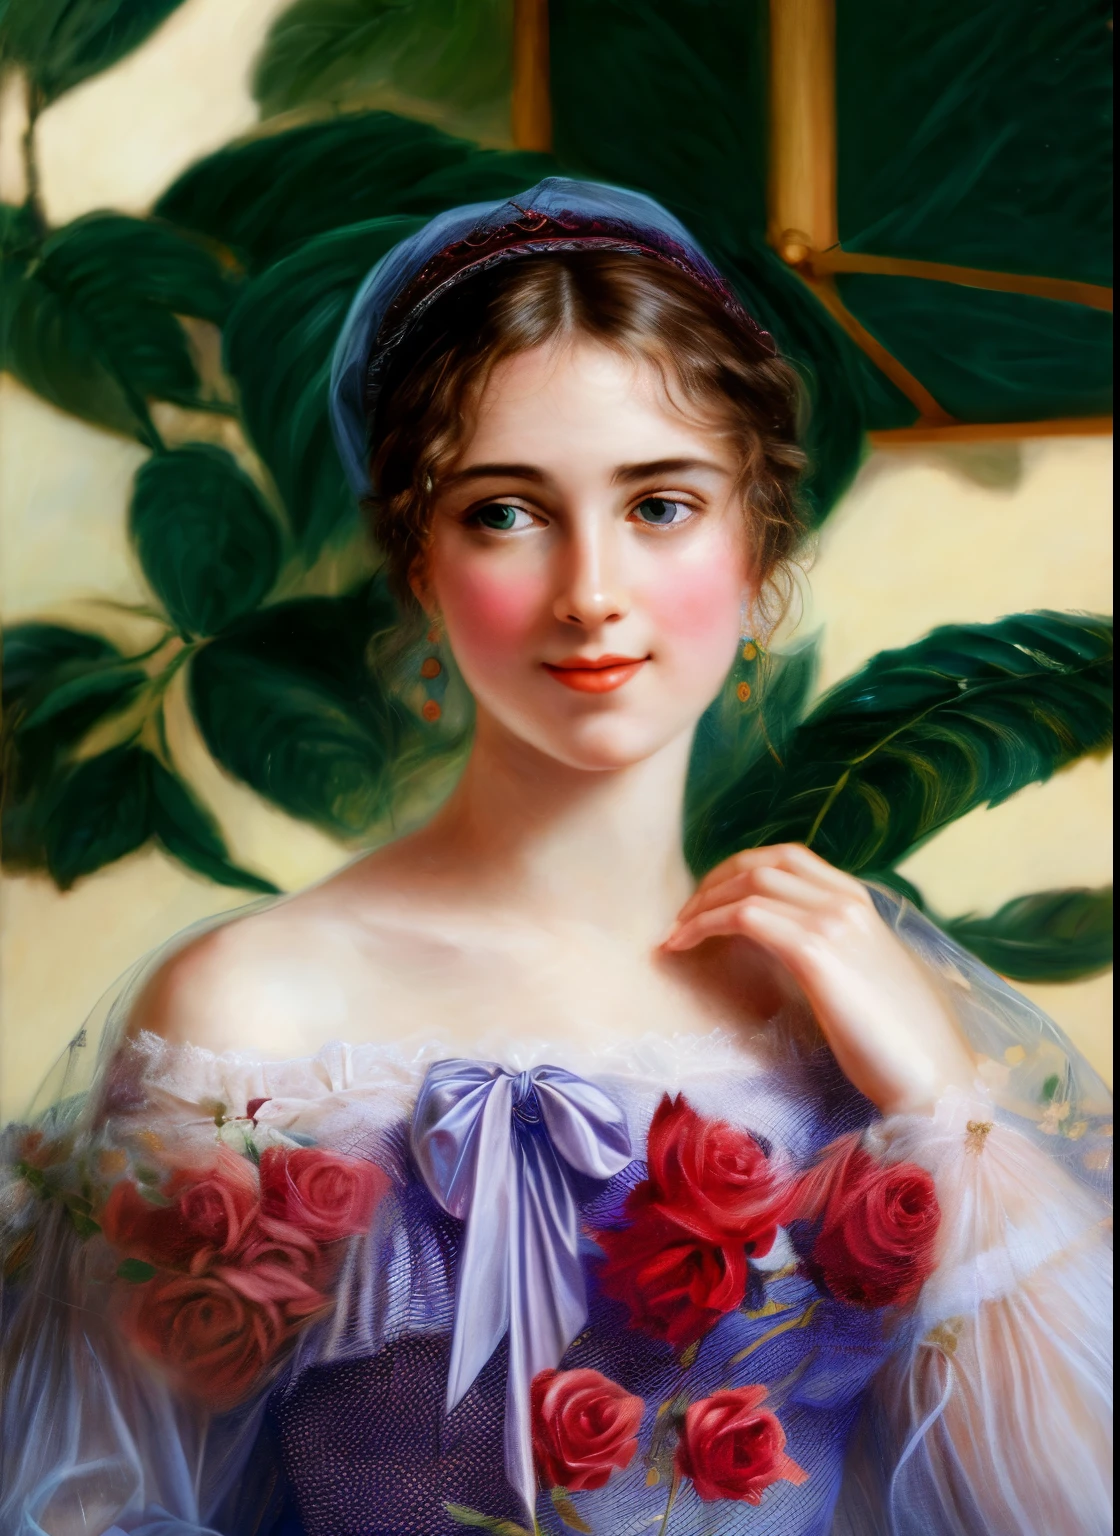 painting of a extremely gorgeous woman in a blue dress and a veil holding a rose, adelaide labille - guiard, inspired by Adélaïde Labille-Guiard, by Adélaïde Labille-Guiard, inspired by Élisabeth Vigée Le Brun, by Élisabeth Vigée Le Brun